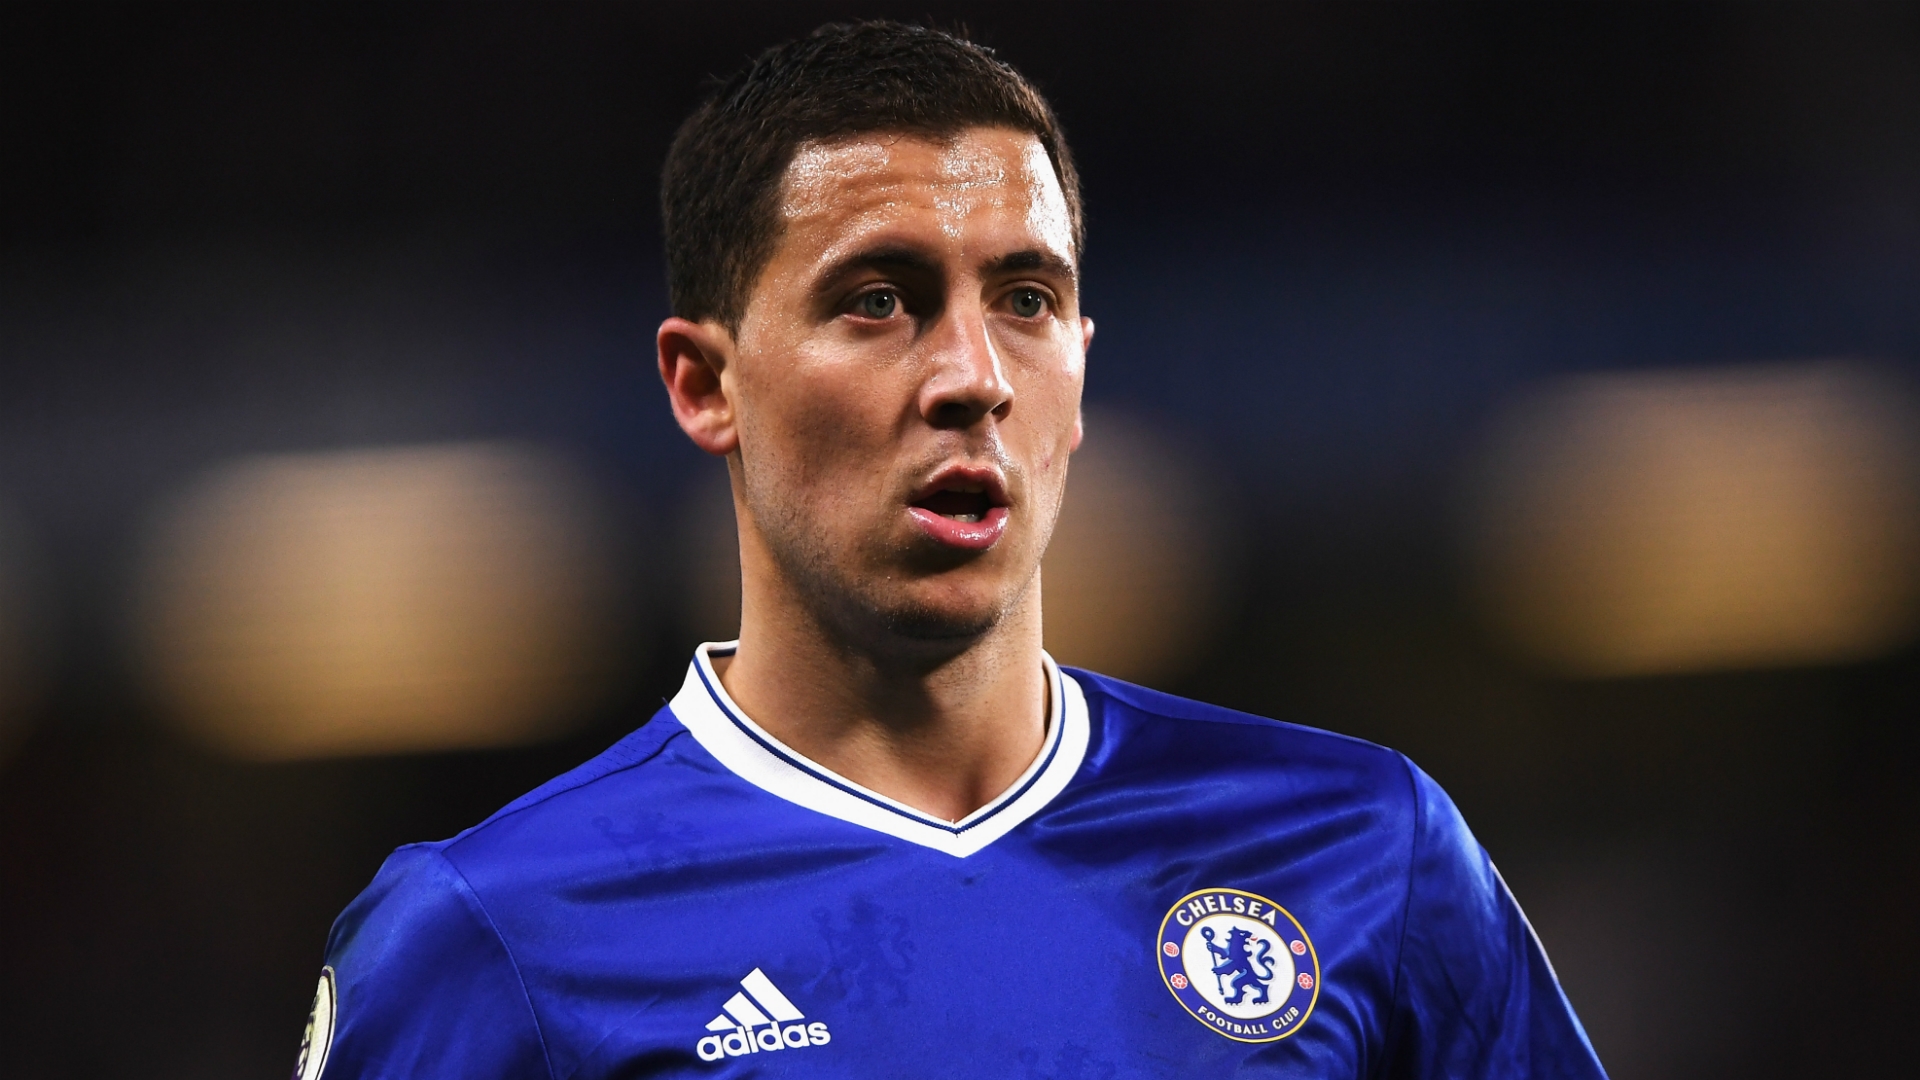 Eden Hazard says he would not turn down an ofer from Real Madrid